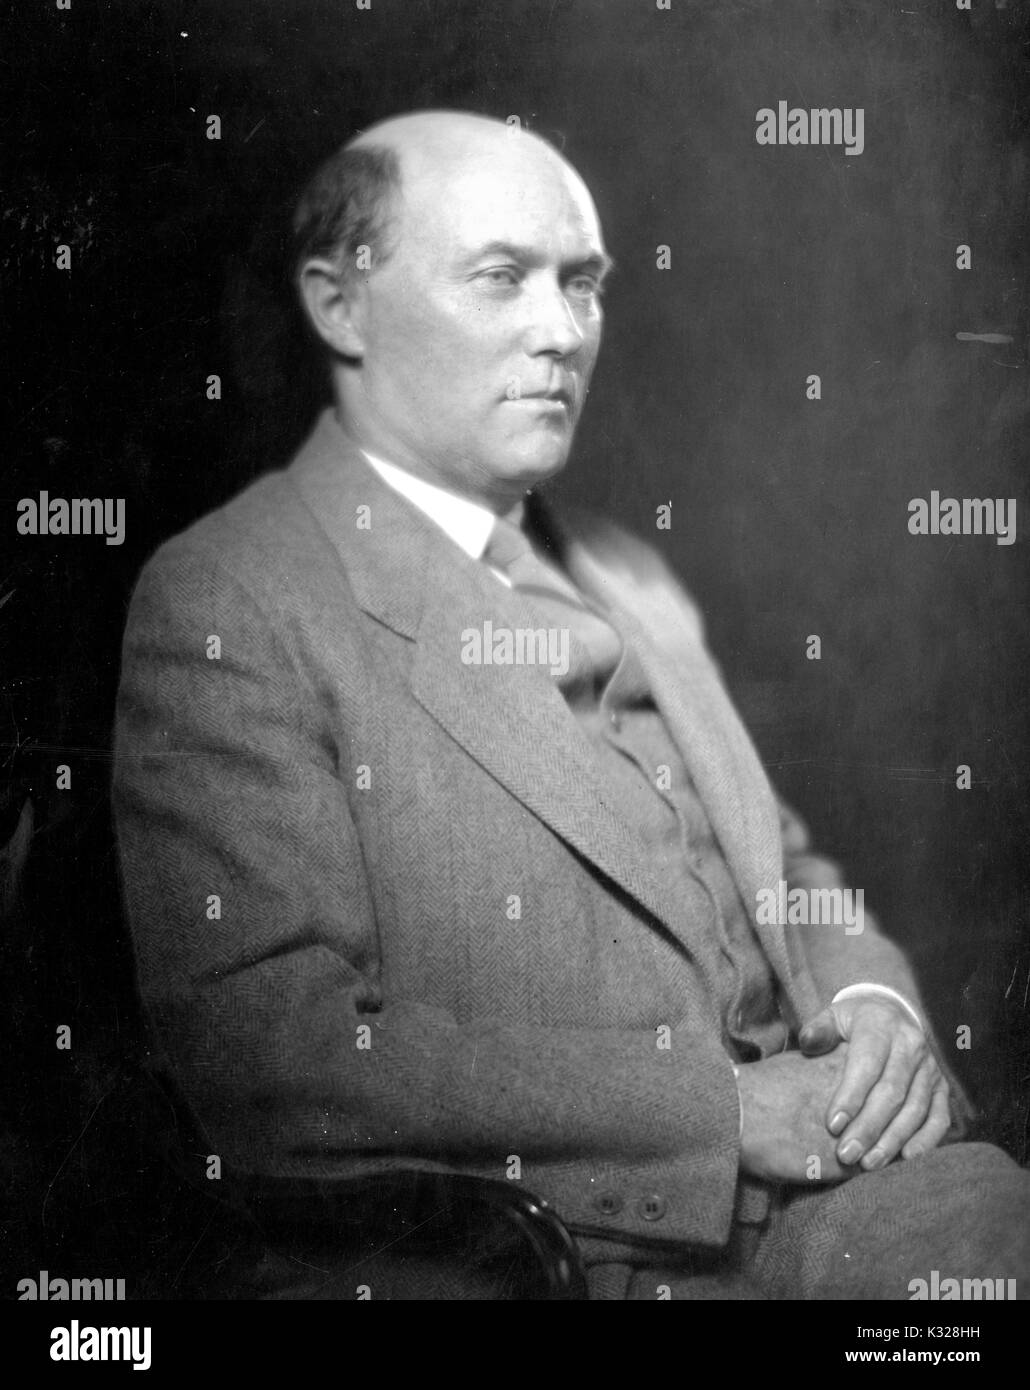 Half-length portrait of American psychologist Knight Dunlap sitting in a chair, 1927. Stock Photo